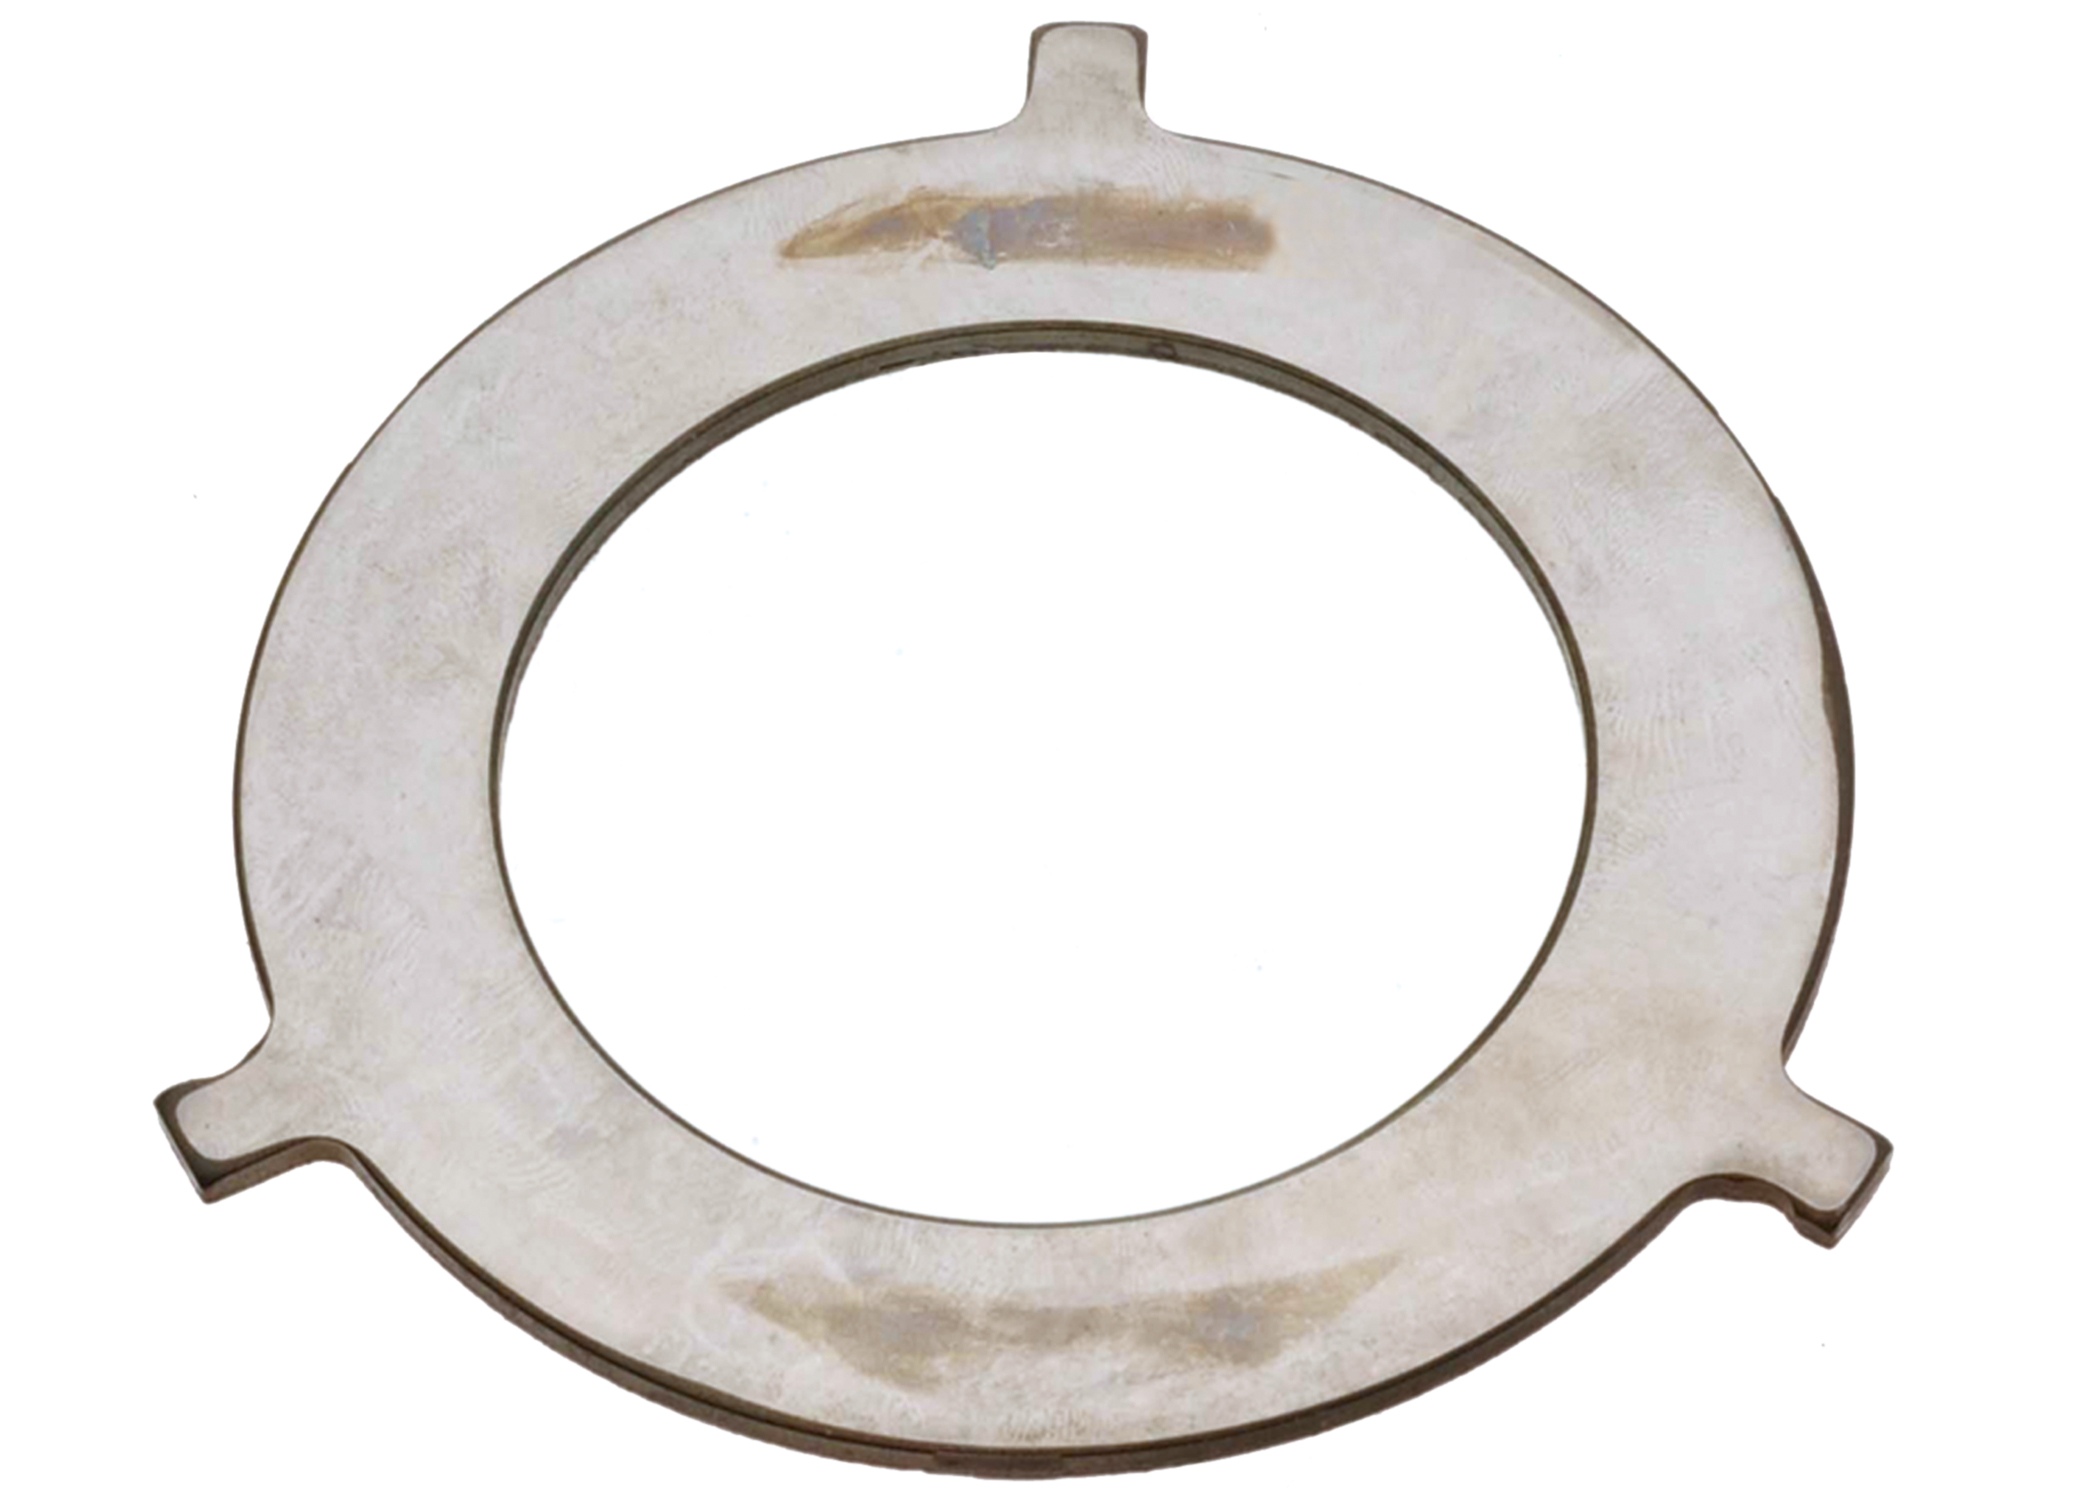 GM GENUINE PARTS - Automatic Transmission Output Shaft Thrust Washer - GMP 8625403